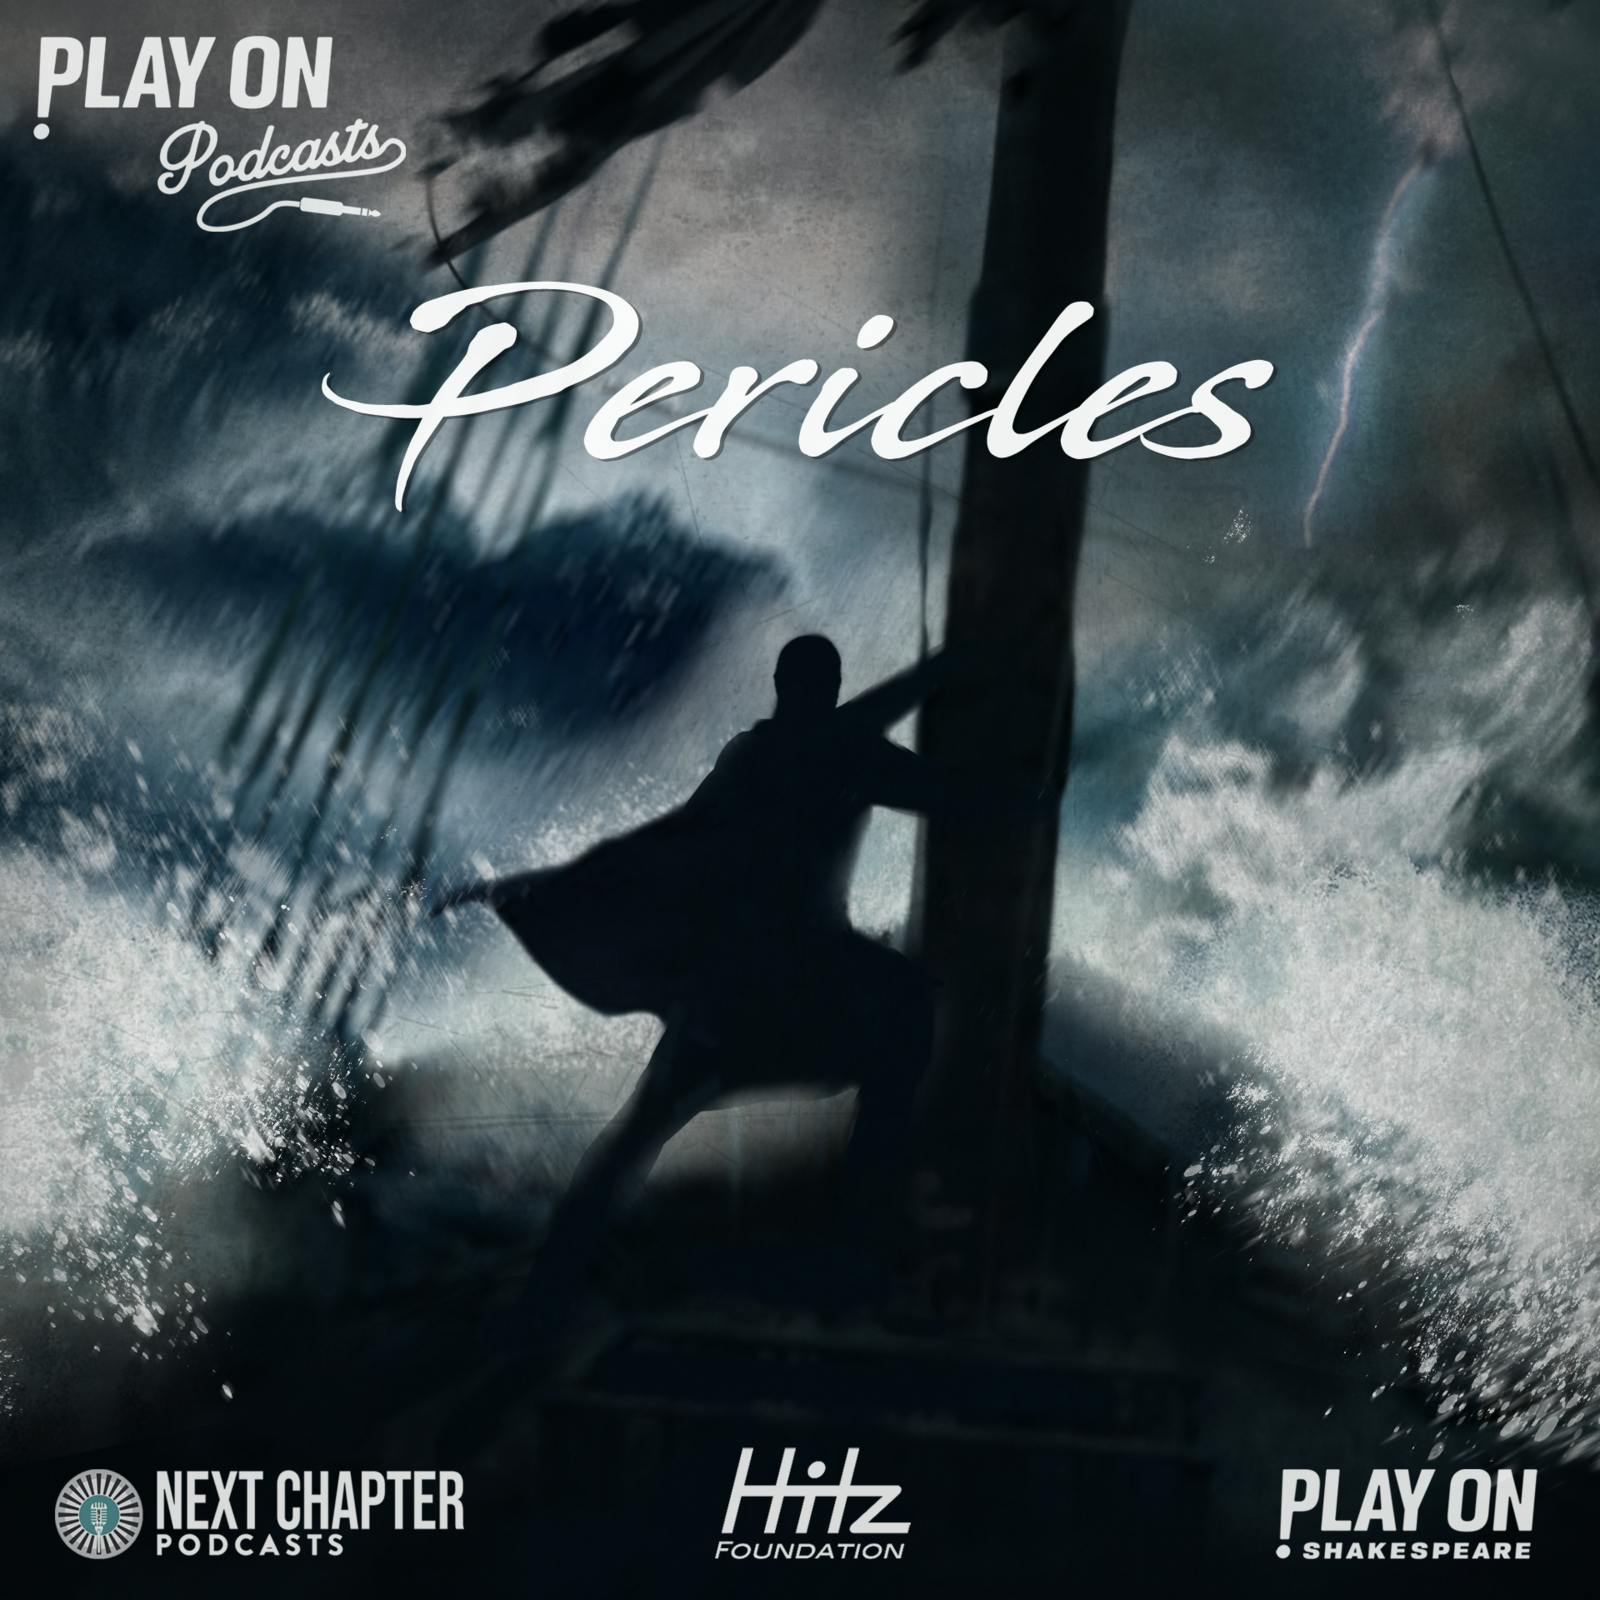 Introducing...The Play On Podcast Series Pericles